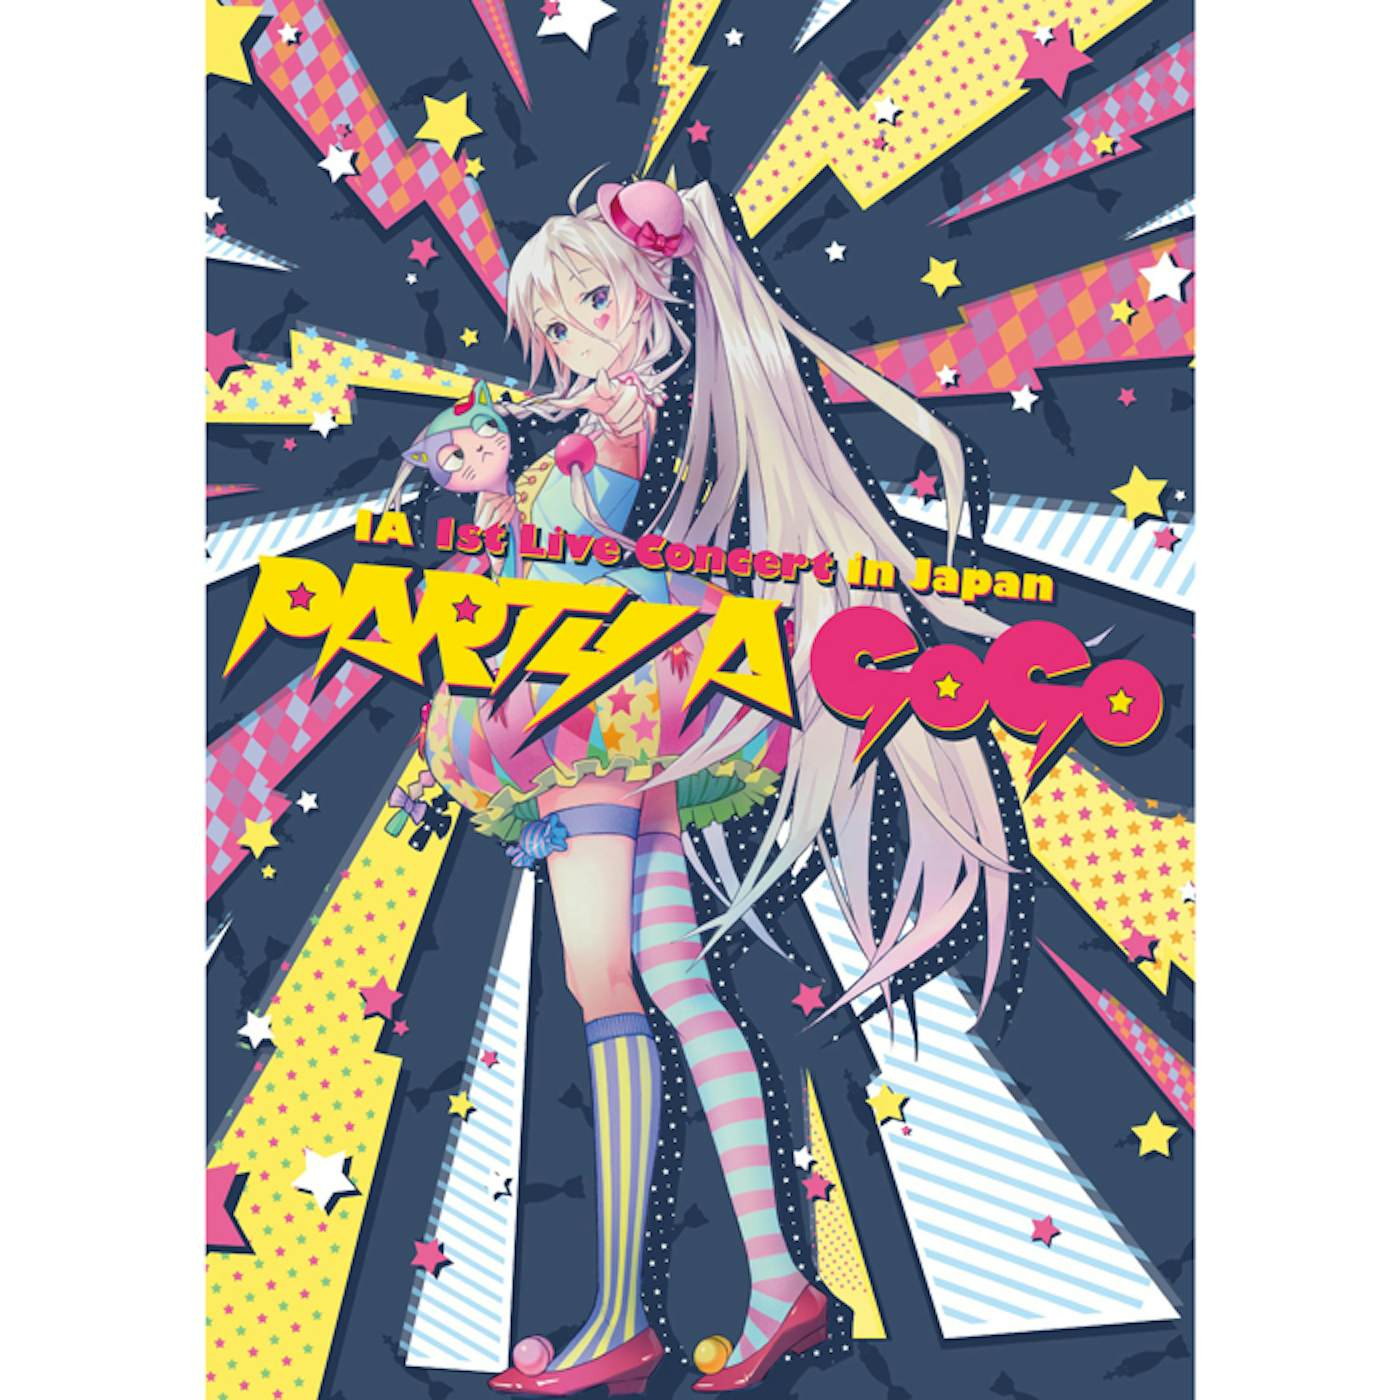 IA 1st Live Concert in Japan "PARTY A GO-GO"  [Blu-ray]